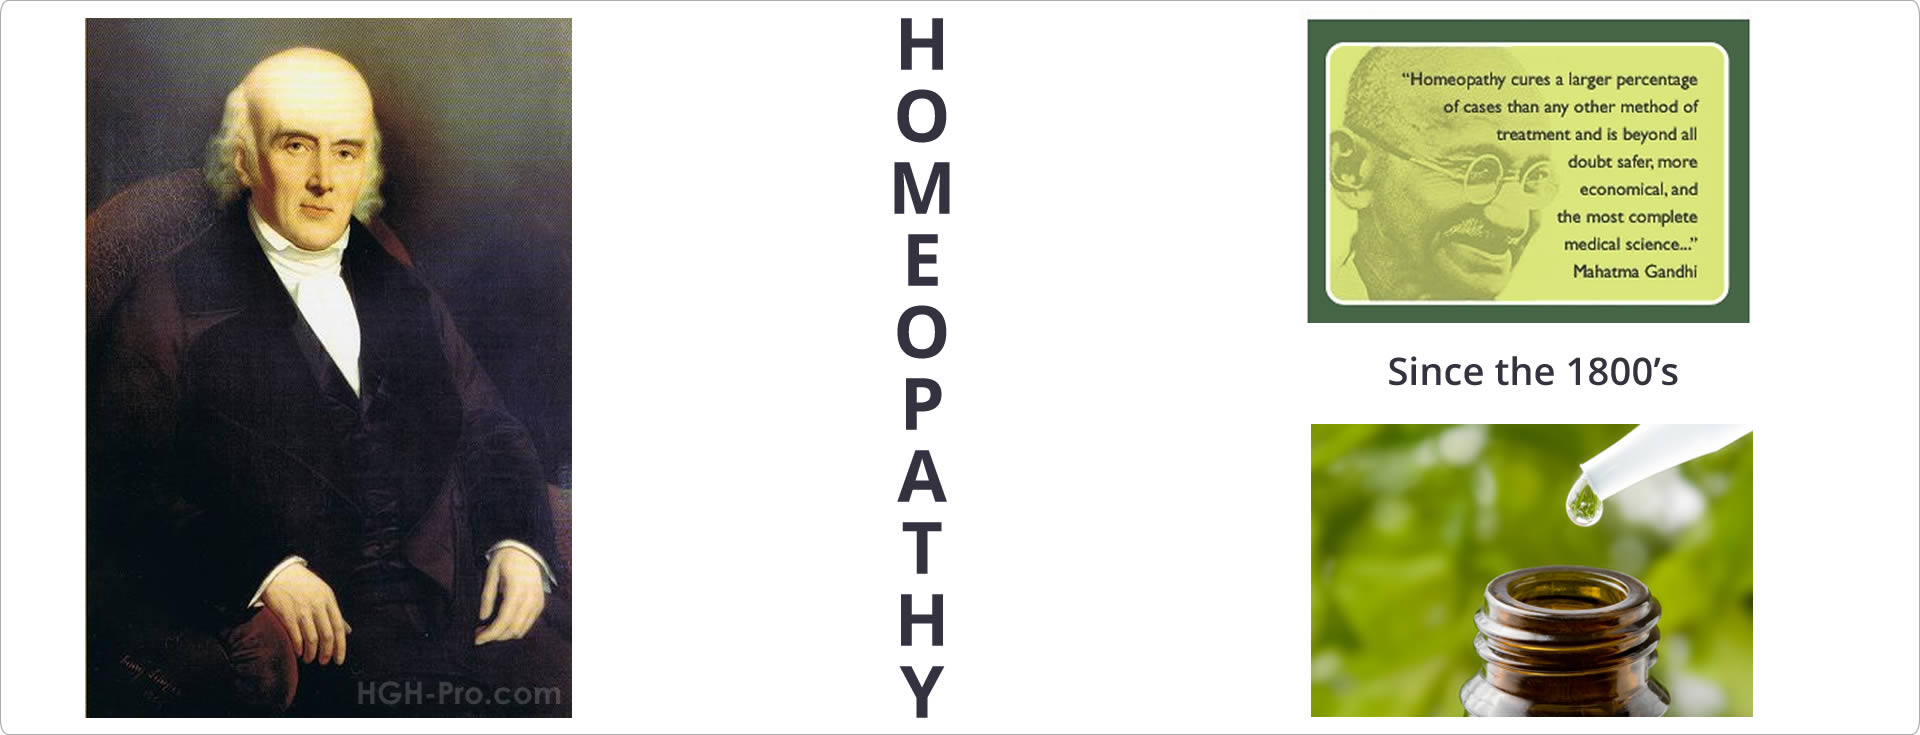 Learn about homeopathy